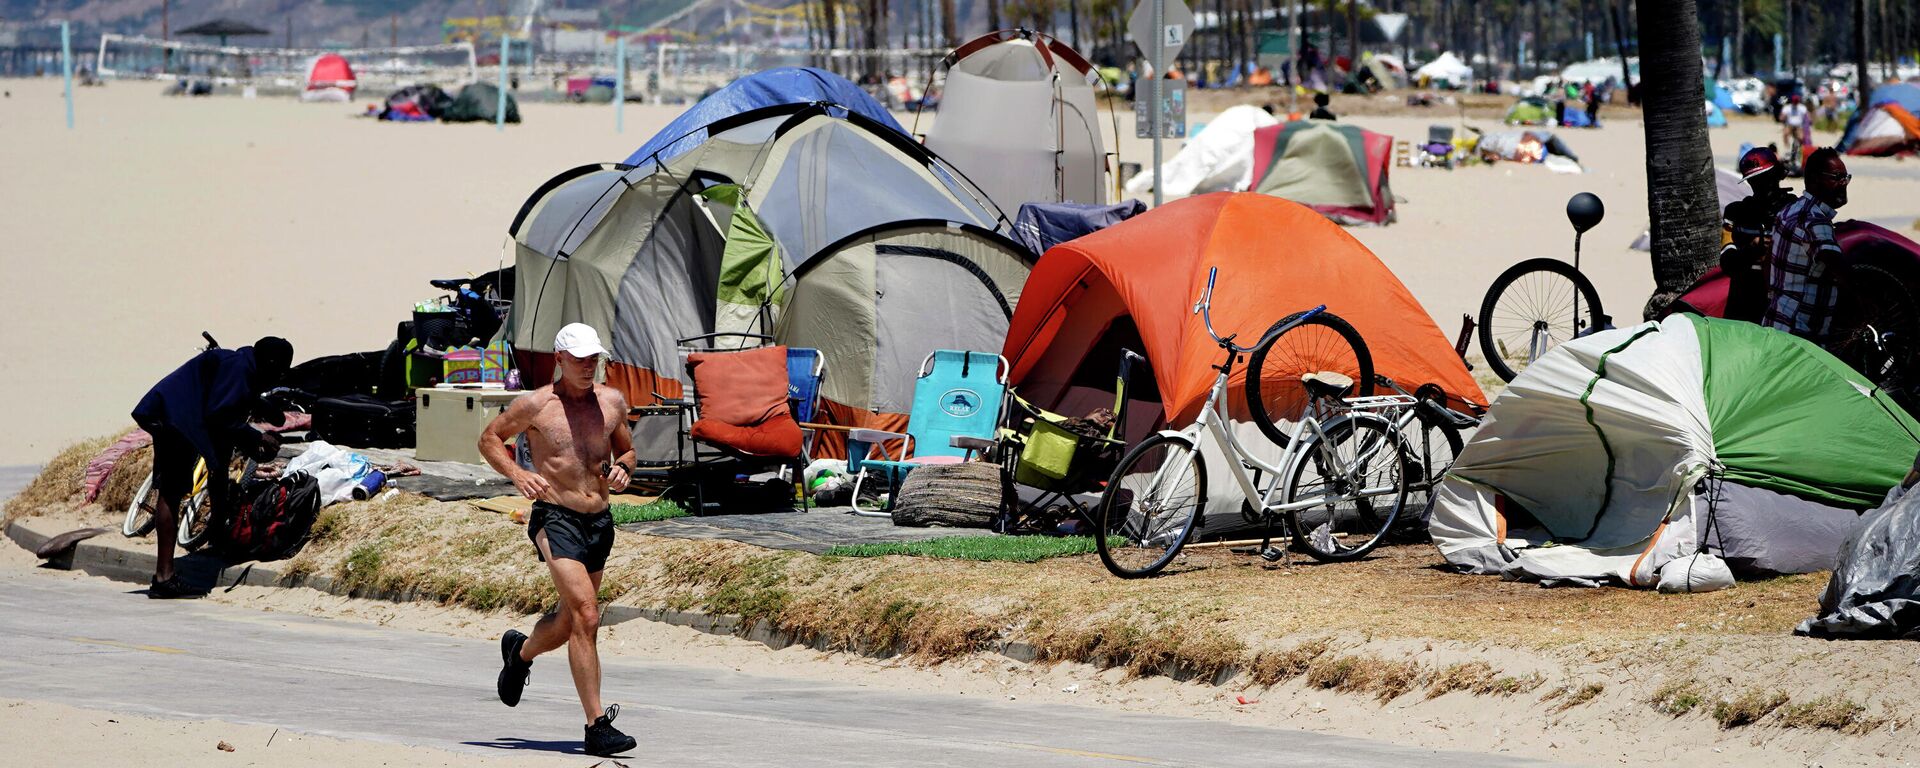  In this June 8, 2021, file photo, a jogger runs past a homeless encampment in the Venice Beach section of Los Angeles. California Gov. Newsom on Thursday, Sept 16, 2021, approved two measures to slice through local zoning ordinances as the most populous state struggles with soaring home prices, an affordable housing shortage and stubborn homelessness. Newson signed the most prominent legislation despite nearly 250 cities objecting that it will, by design, undermine local planning and control. - Sputnik International, 1920, 08.03.2024